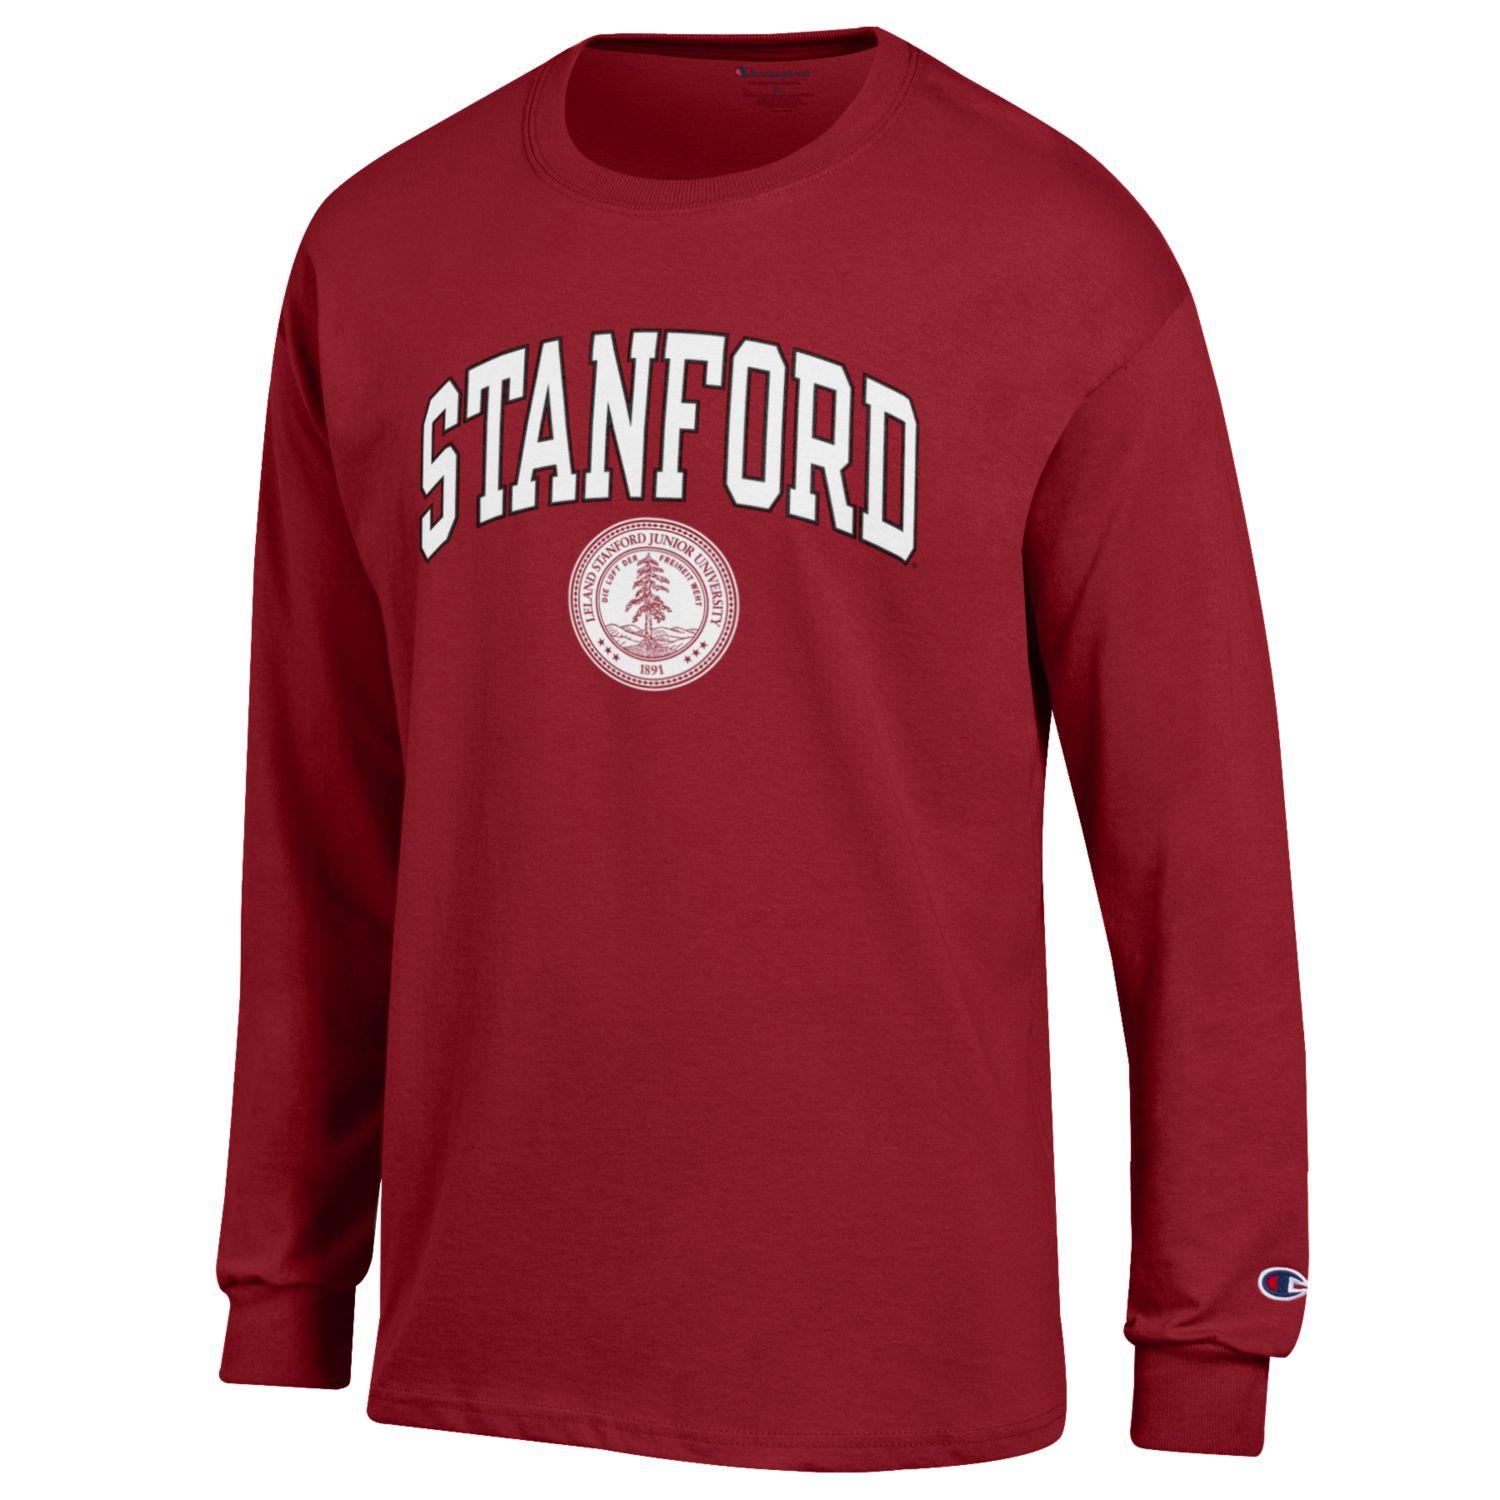 Shop College Wear Stanford Cardinals Arch & Seal Men's Champion Long Sleeve T-Shirt-Cardinal, Size: 2XL, Red